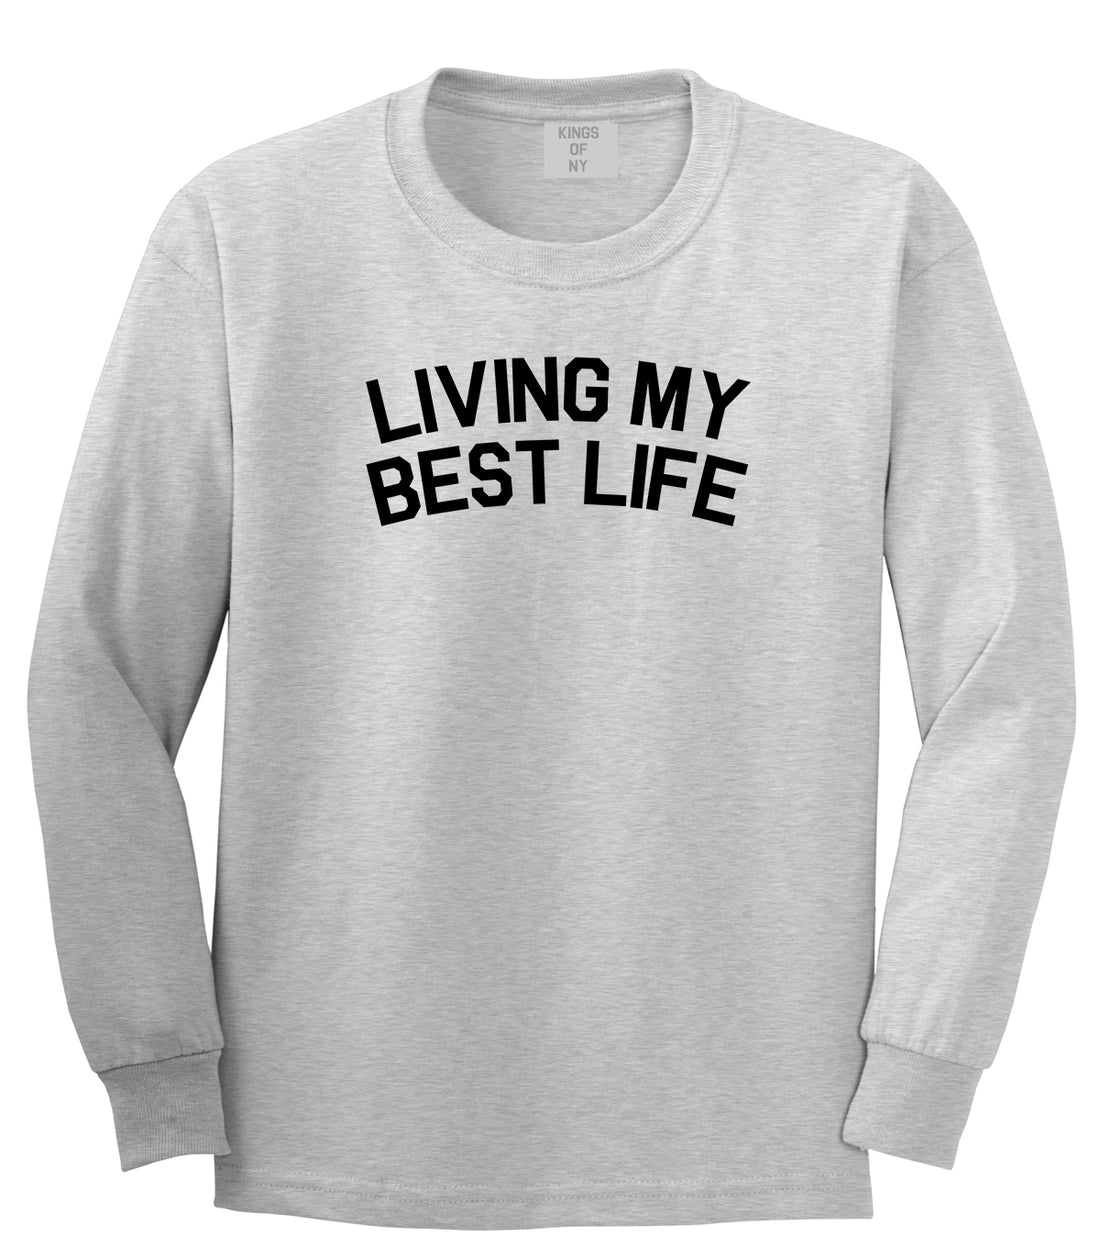 Living My Best Life Mens Long Sleeve T-Shirt Grey by Kings Of NY